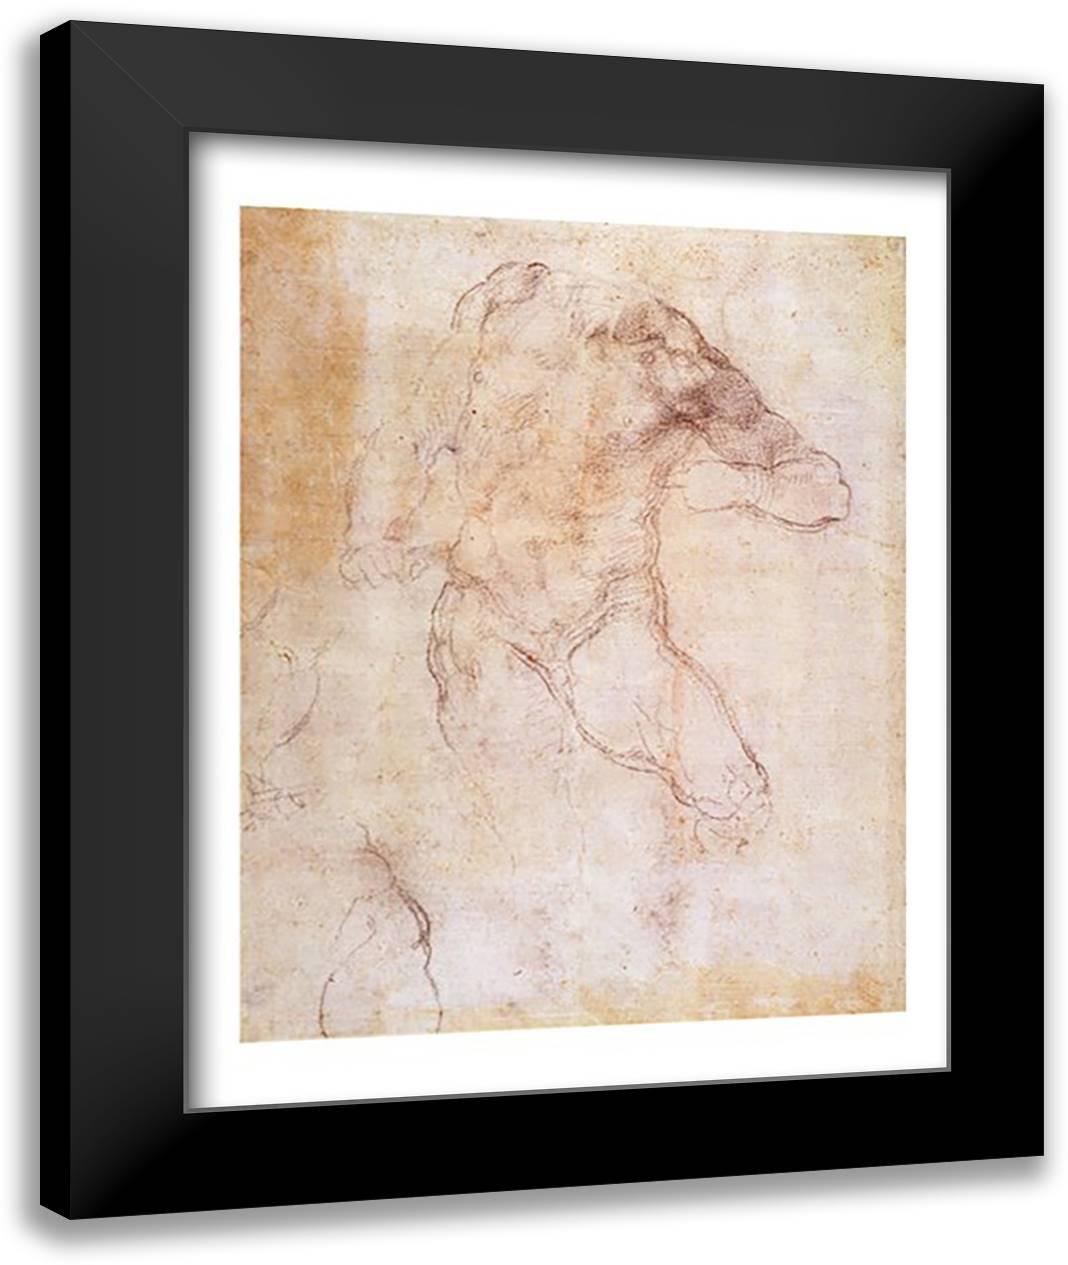 Study of a male nude 22x28 Black Modern Wood Framed Art Print Poster by Michelangelo